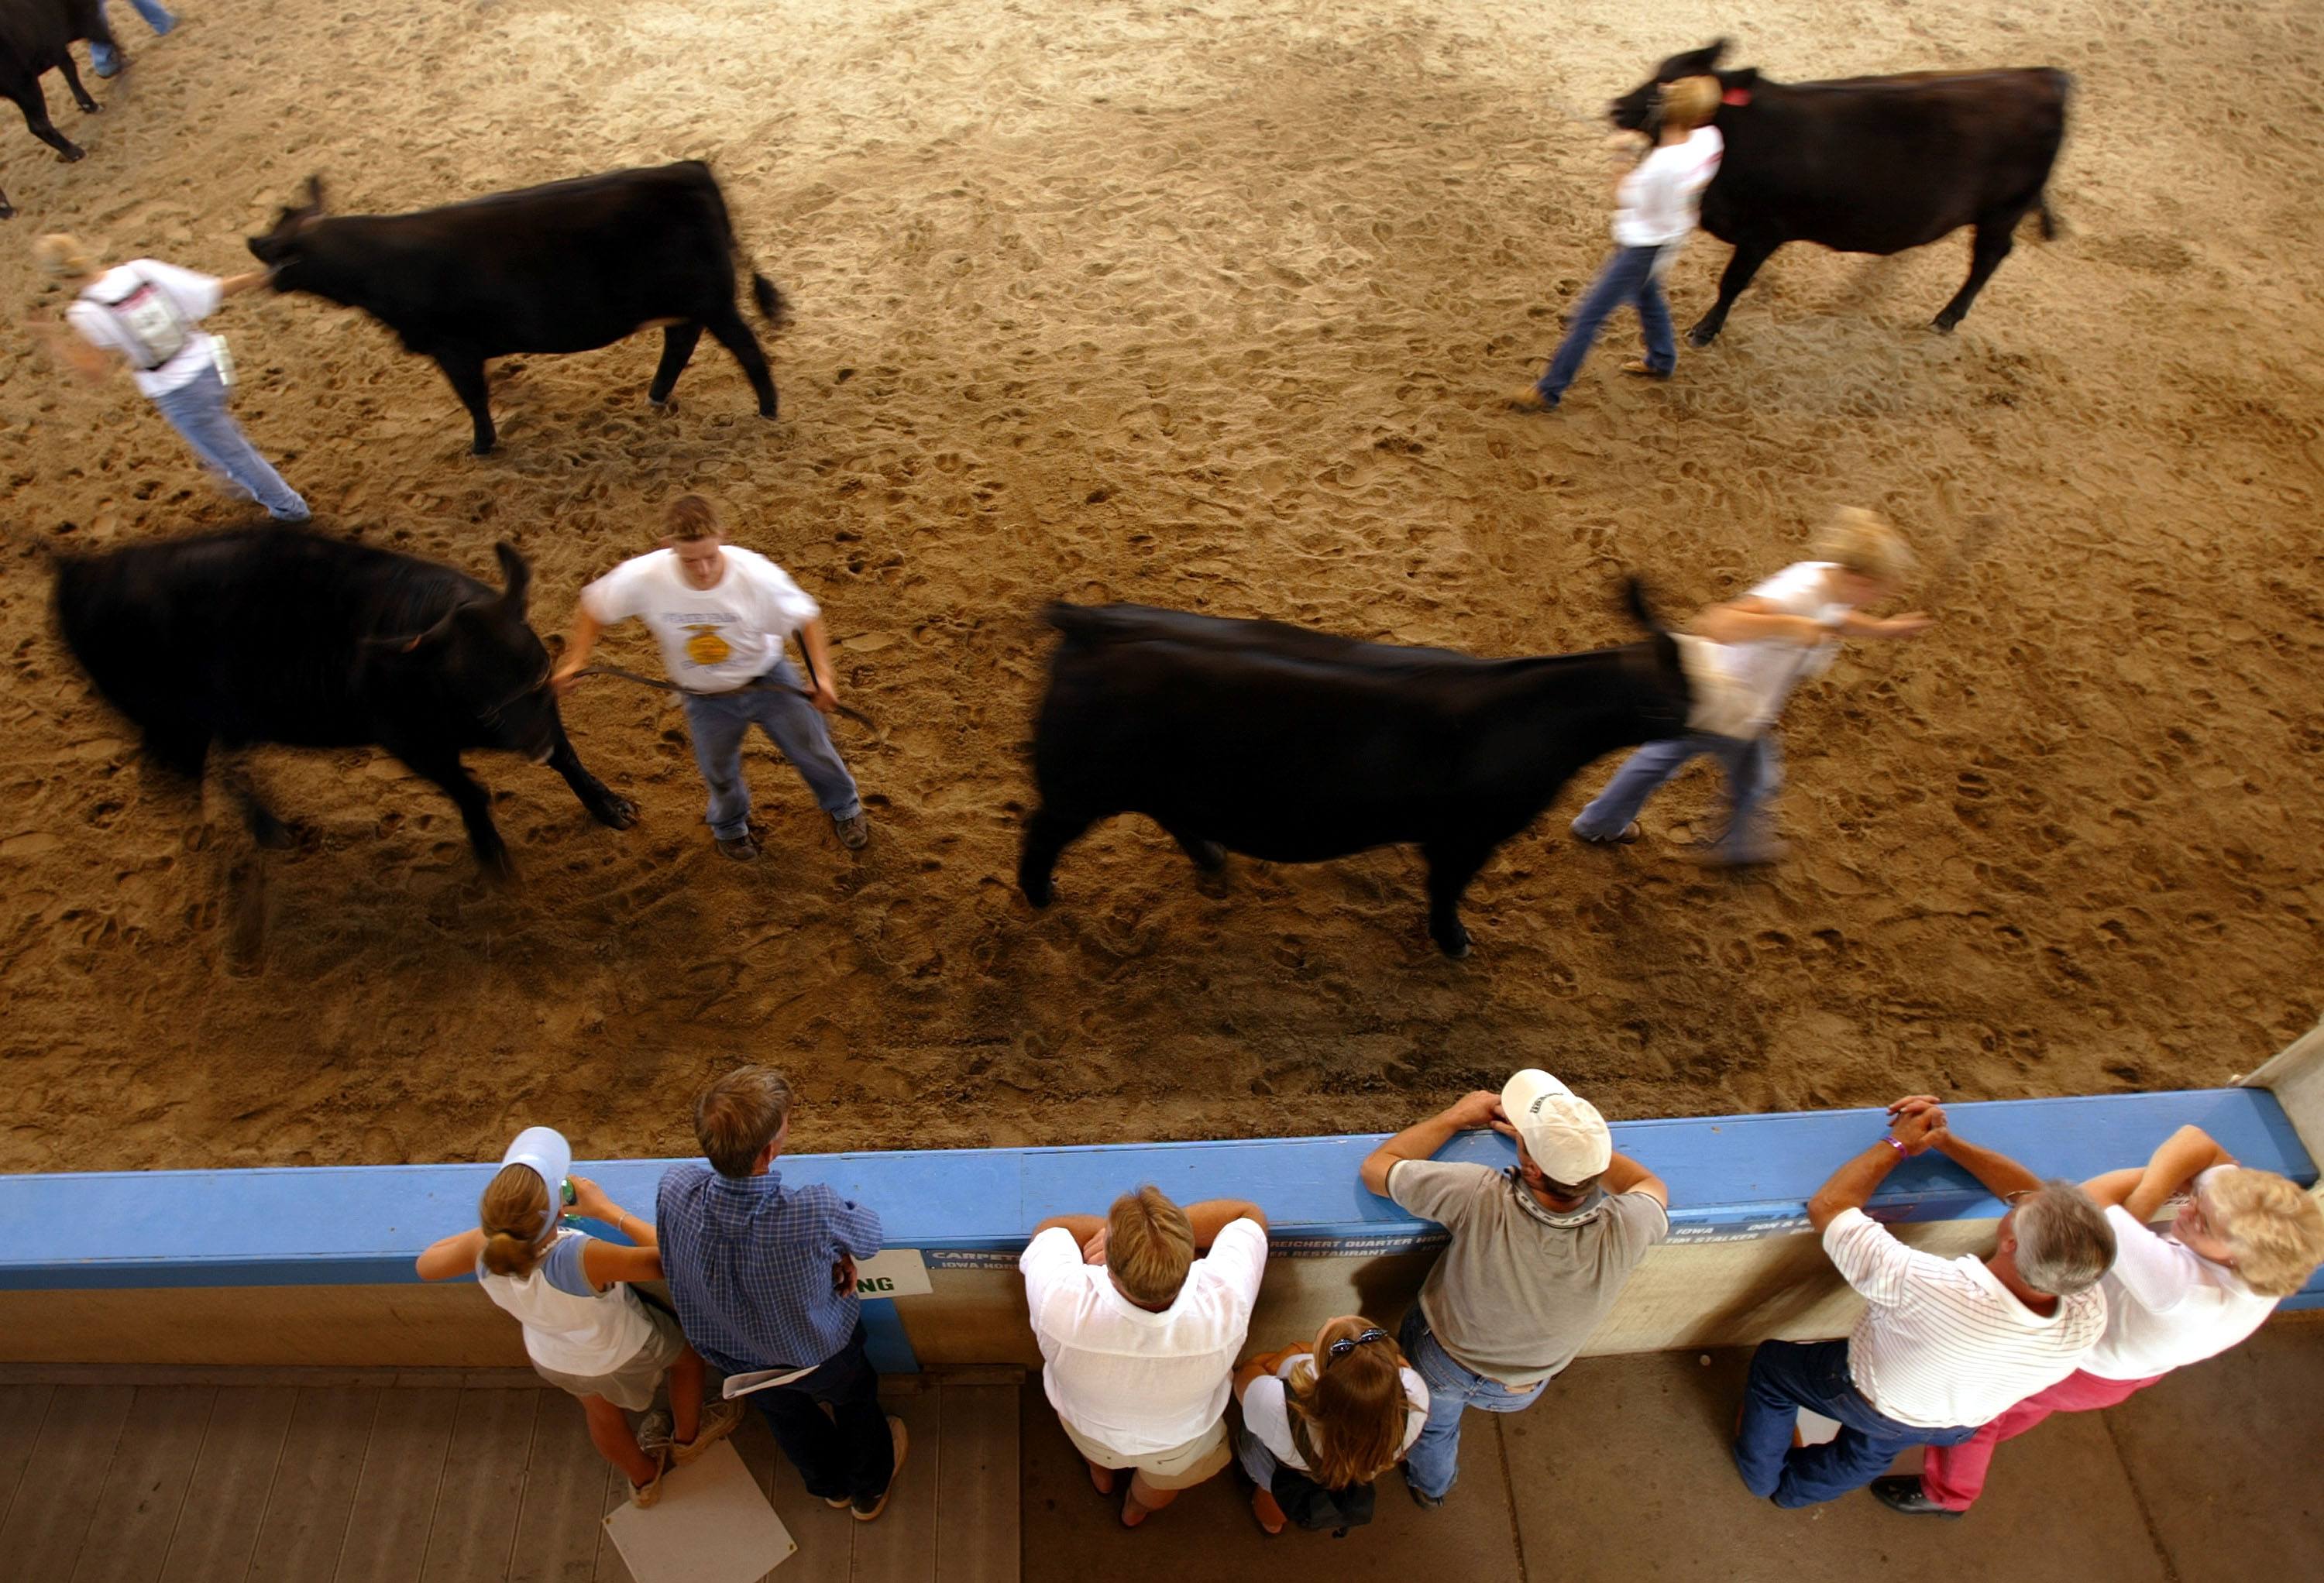 Teens parading cattle during 4-H event at the Iowa State fair